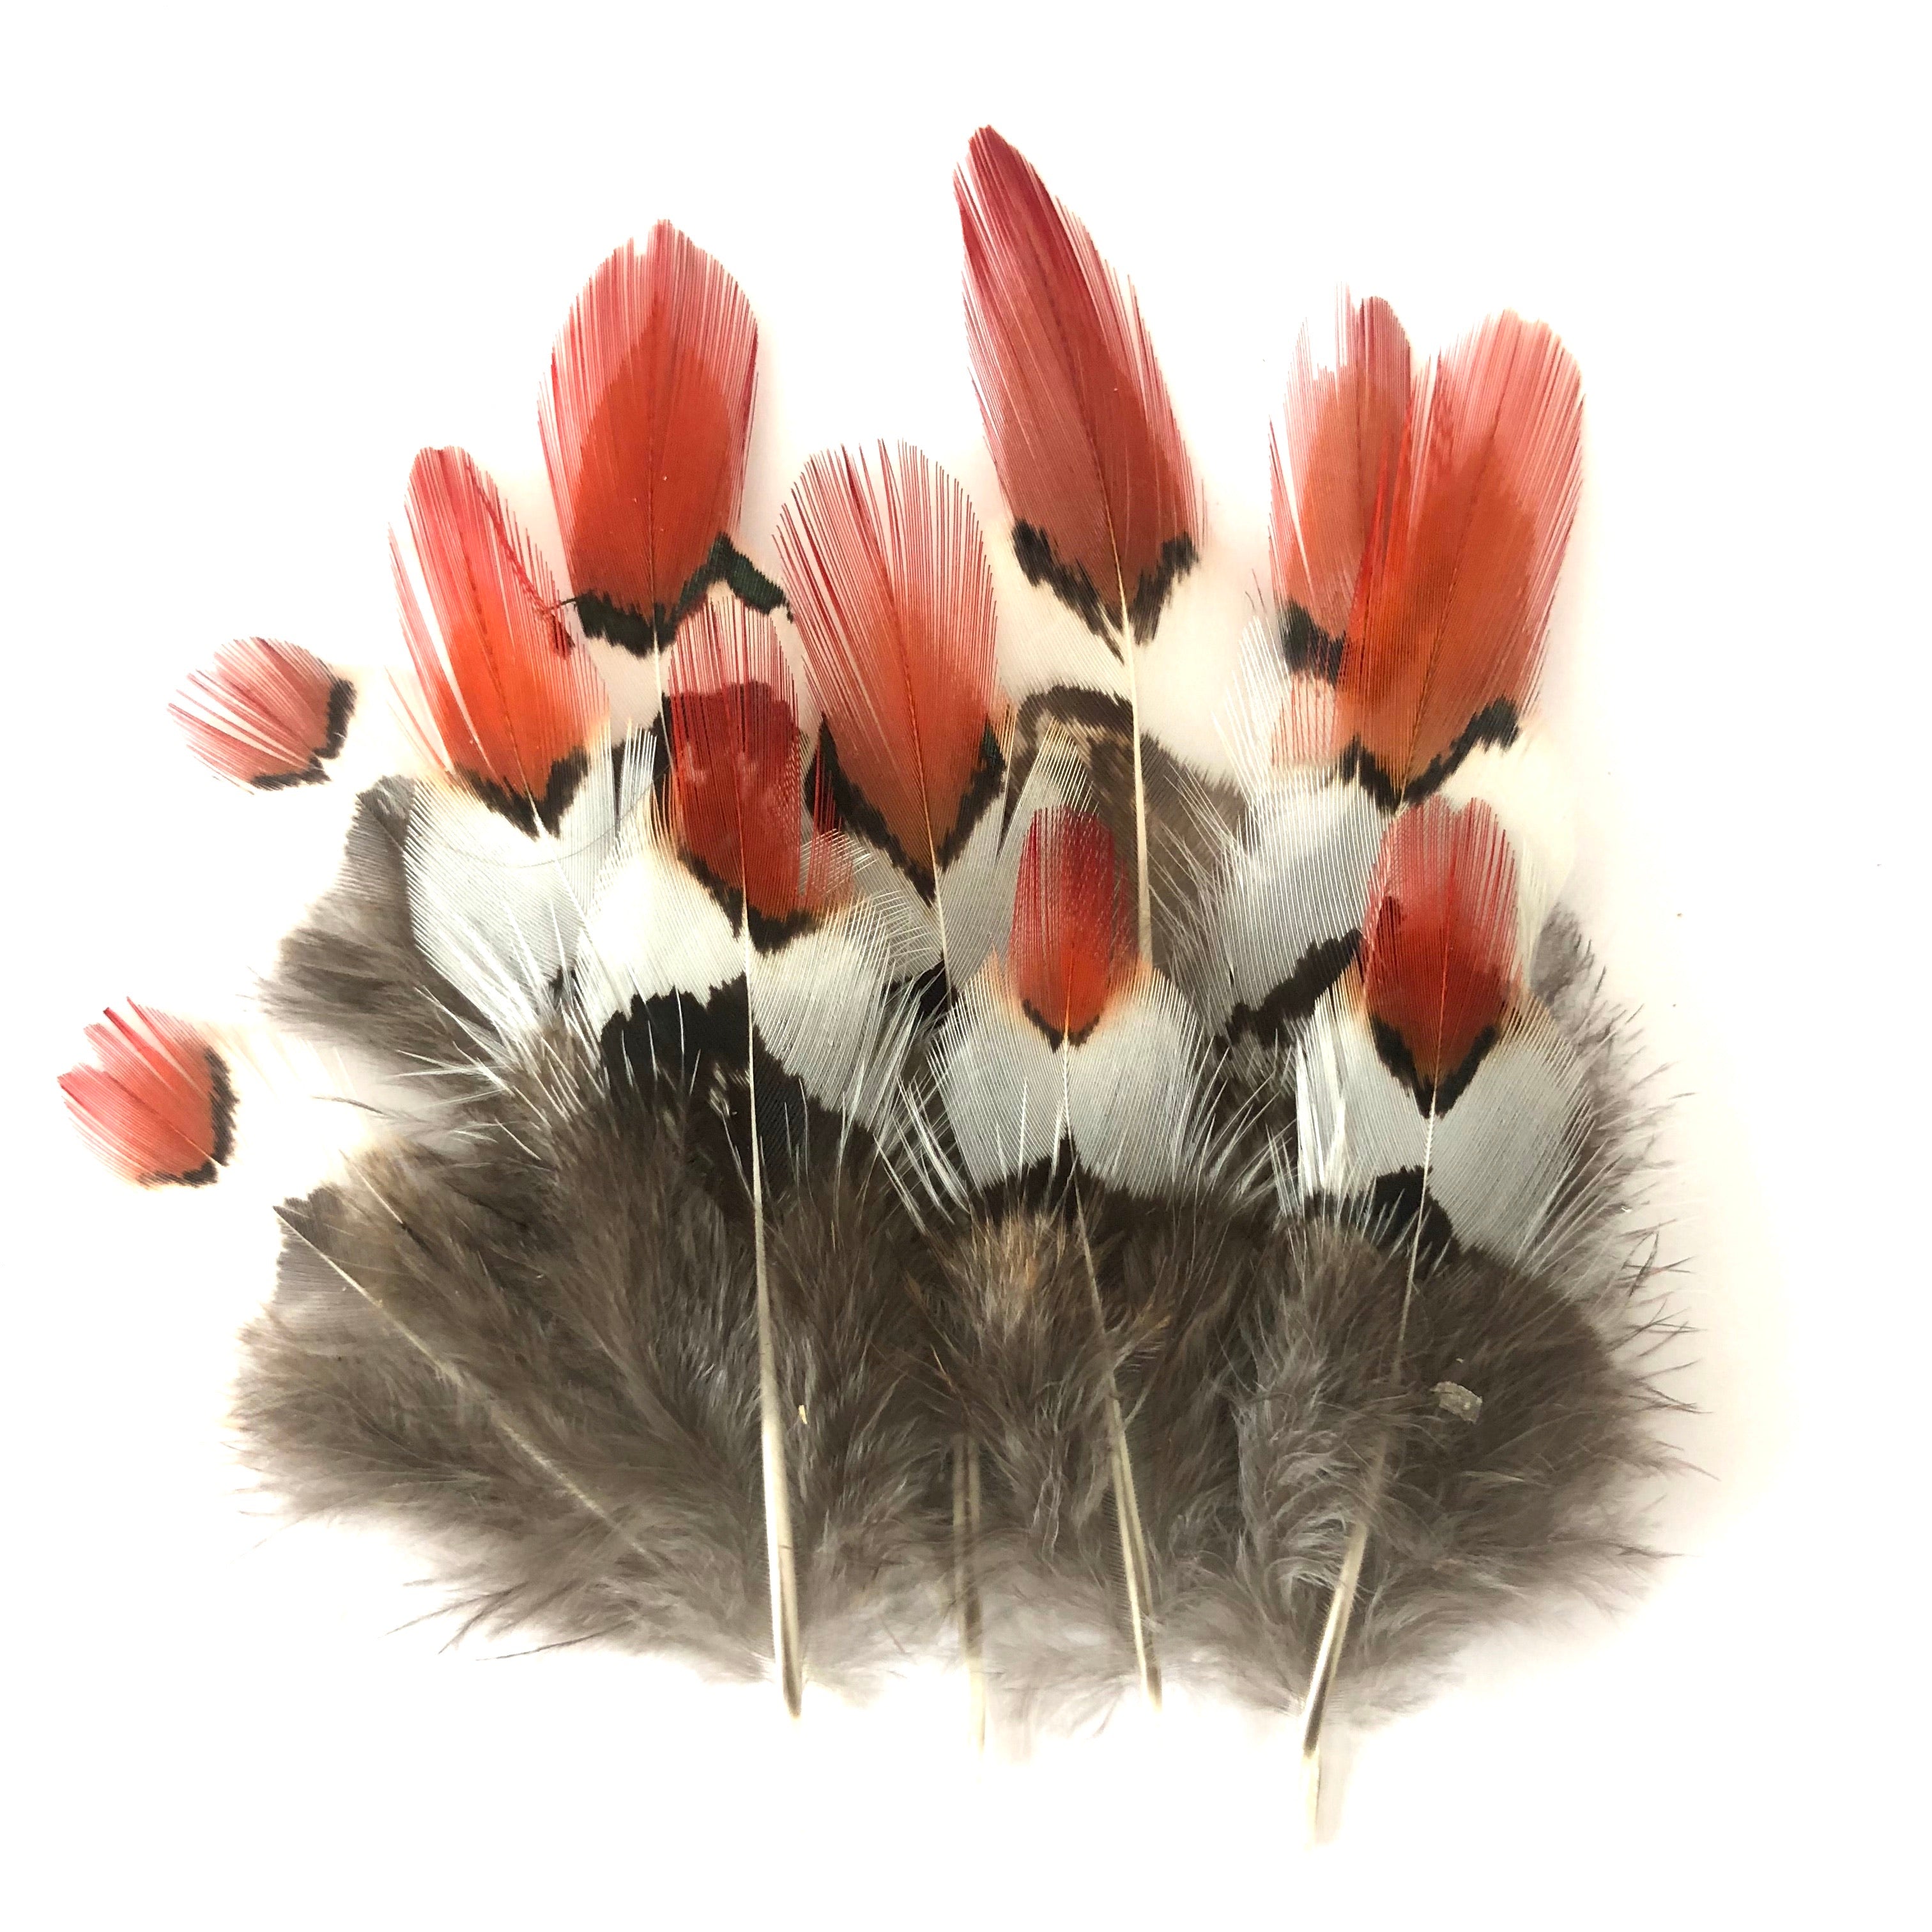 Natural Orange Tipped Lady Amherst Pheasant Feather Plumage x 10pcs